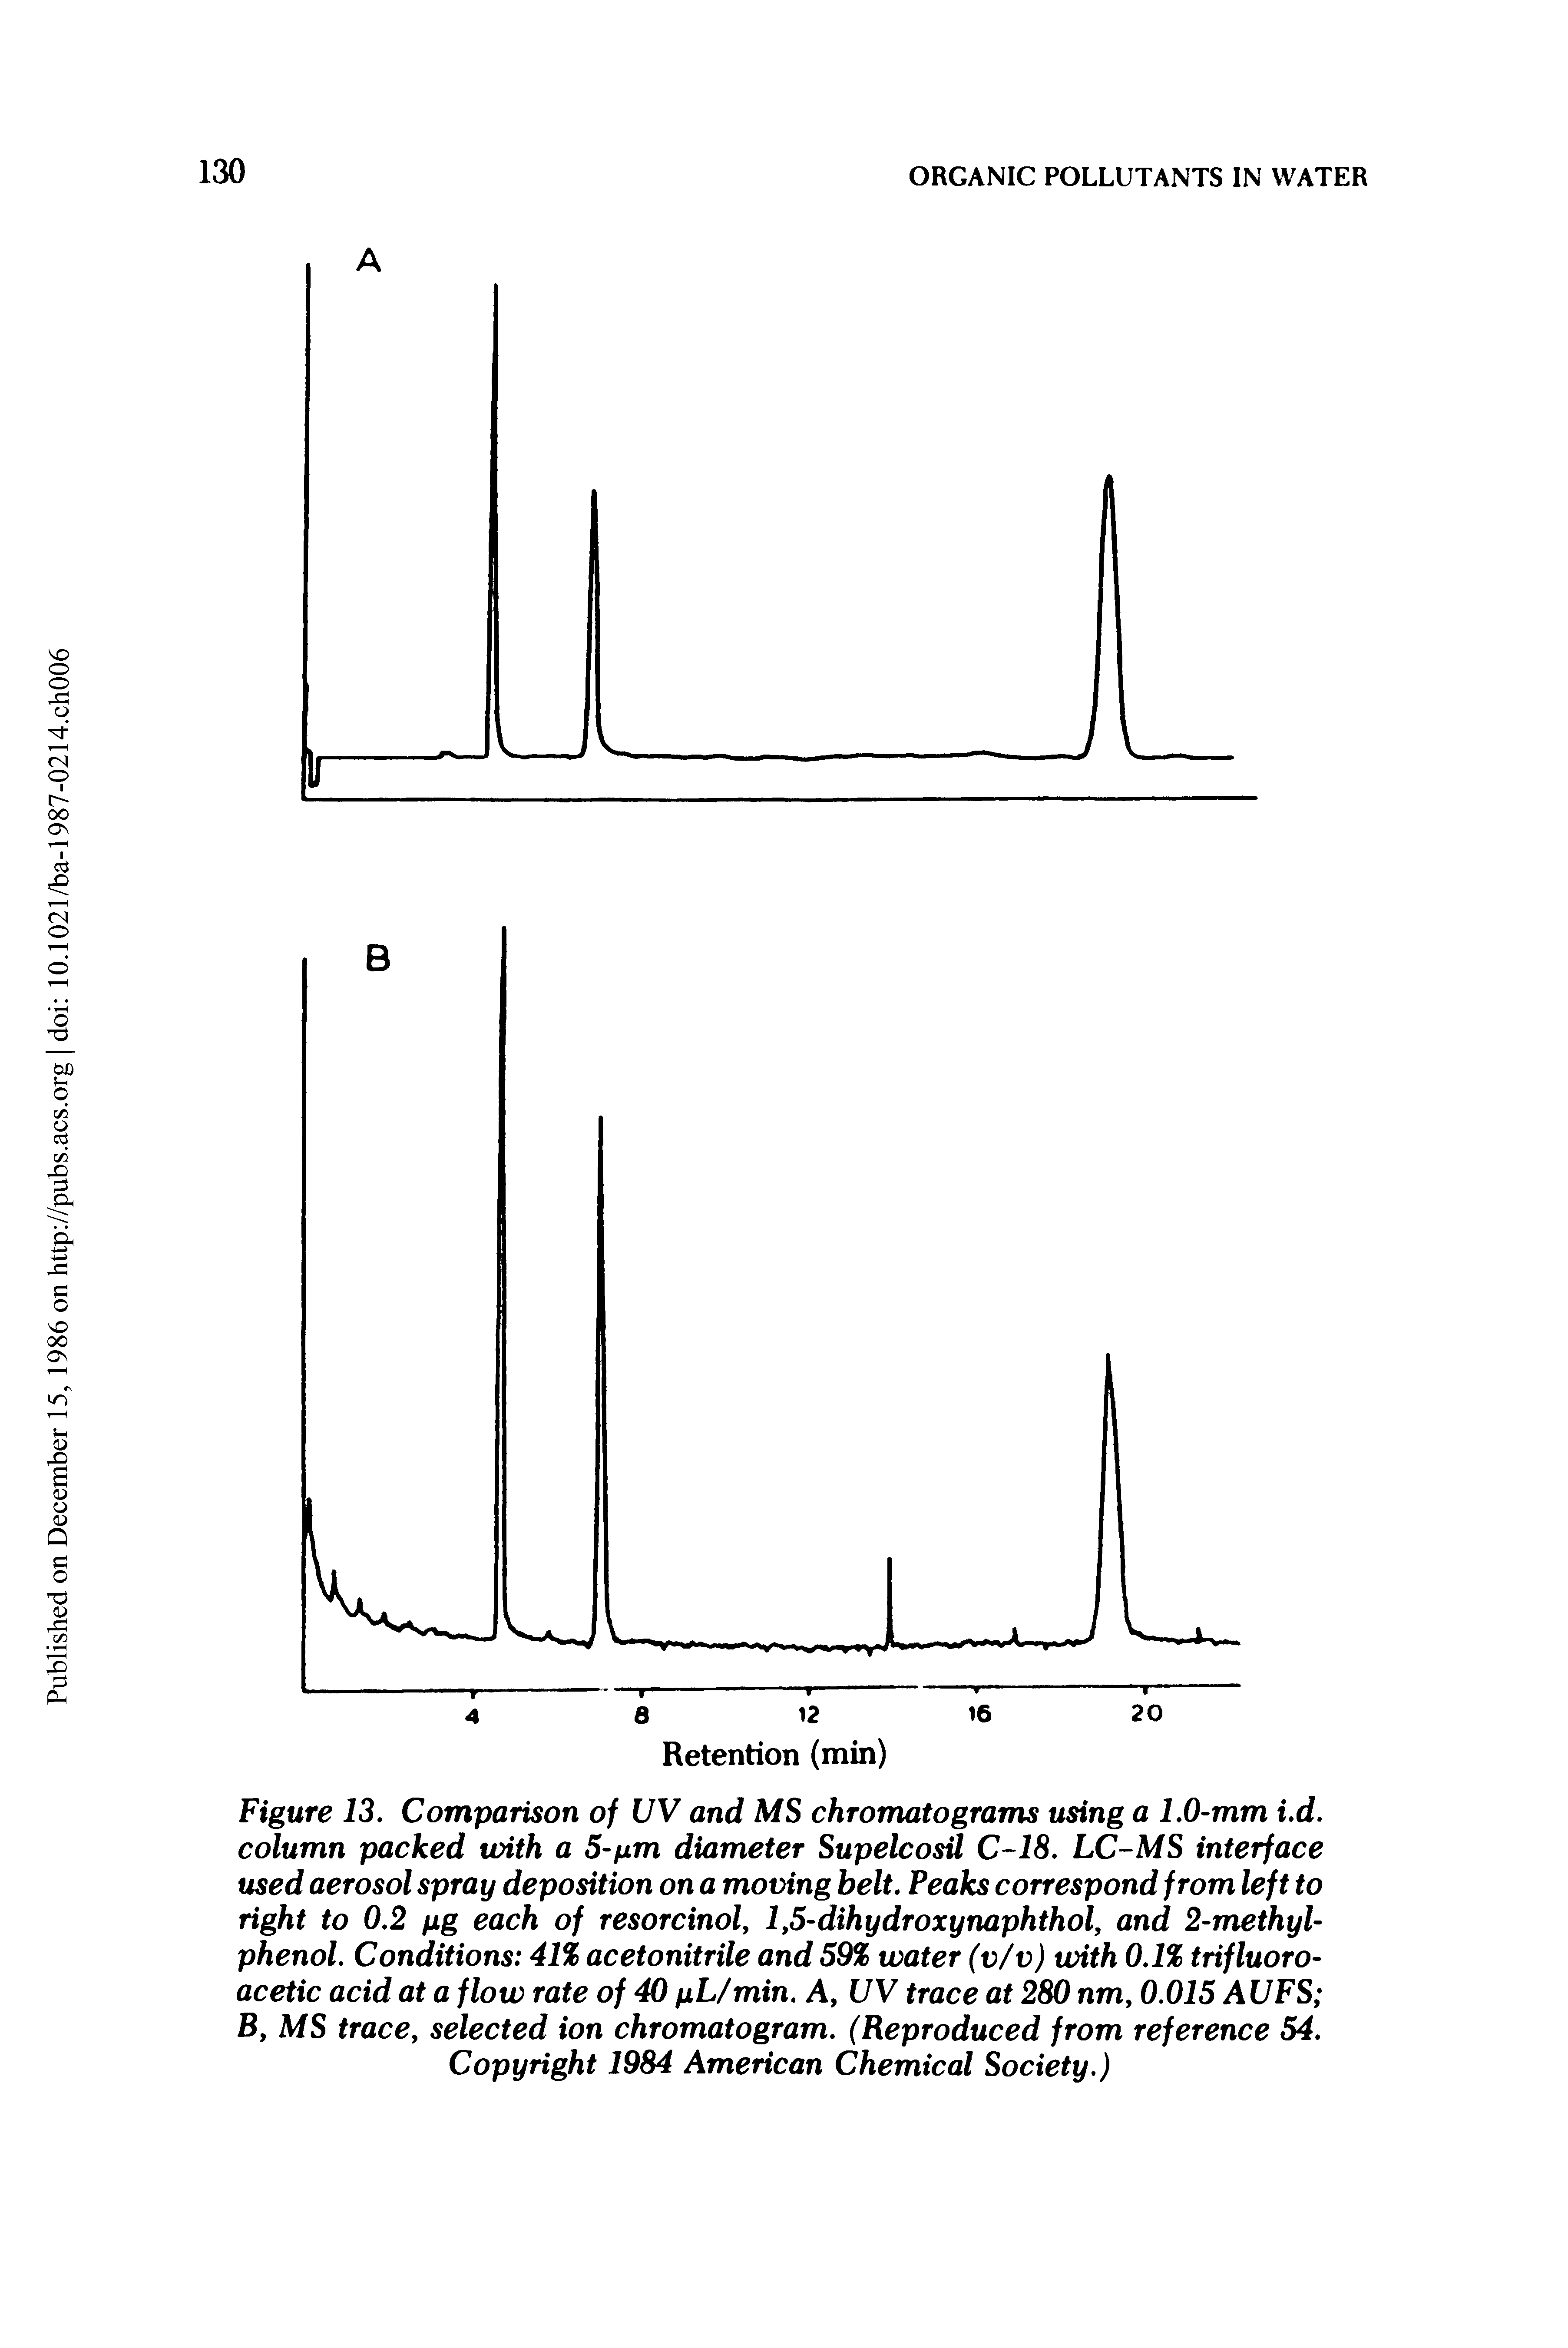 Figure 13. Comparison of UV and MS chromatograms using a 1.0-mm i.d. column packed with a 5-pm diameter Supelcosil C-18. LC-MS interface used aerosol spray deposition on a moving belt. Peaks correspond from left to right to 0.2 pg each of resorcinol, 1,5-dihydroxynaphthol, and 2-methyl-phenol. Conditions 41% acetonitrile and 59% water (v/v) with 0.1% trifluoro-acetic acid at a flow rate of 40 pL/min. A, UV trace at 280 nm, 0.015 AUFS B, MS trace, selected ion chromatogram. (Reproduced from reference 54.